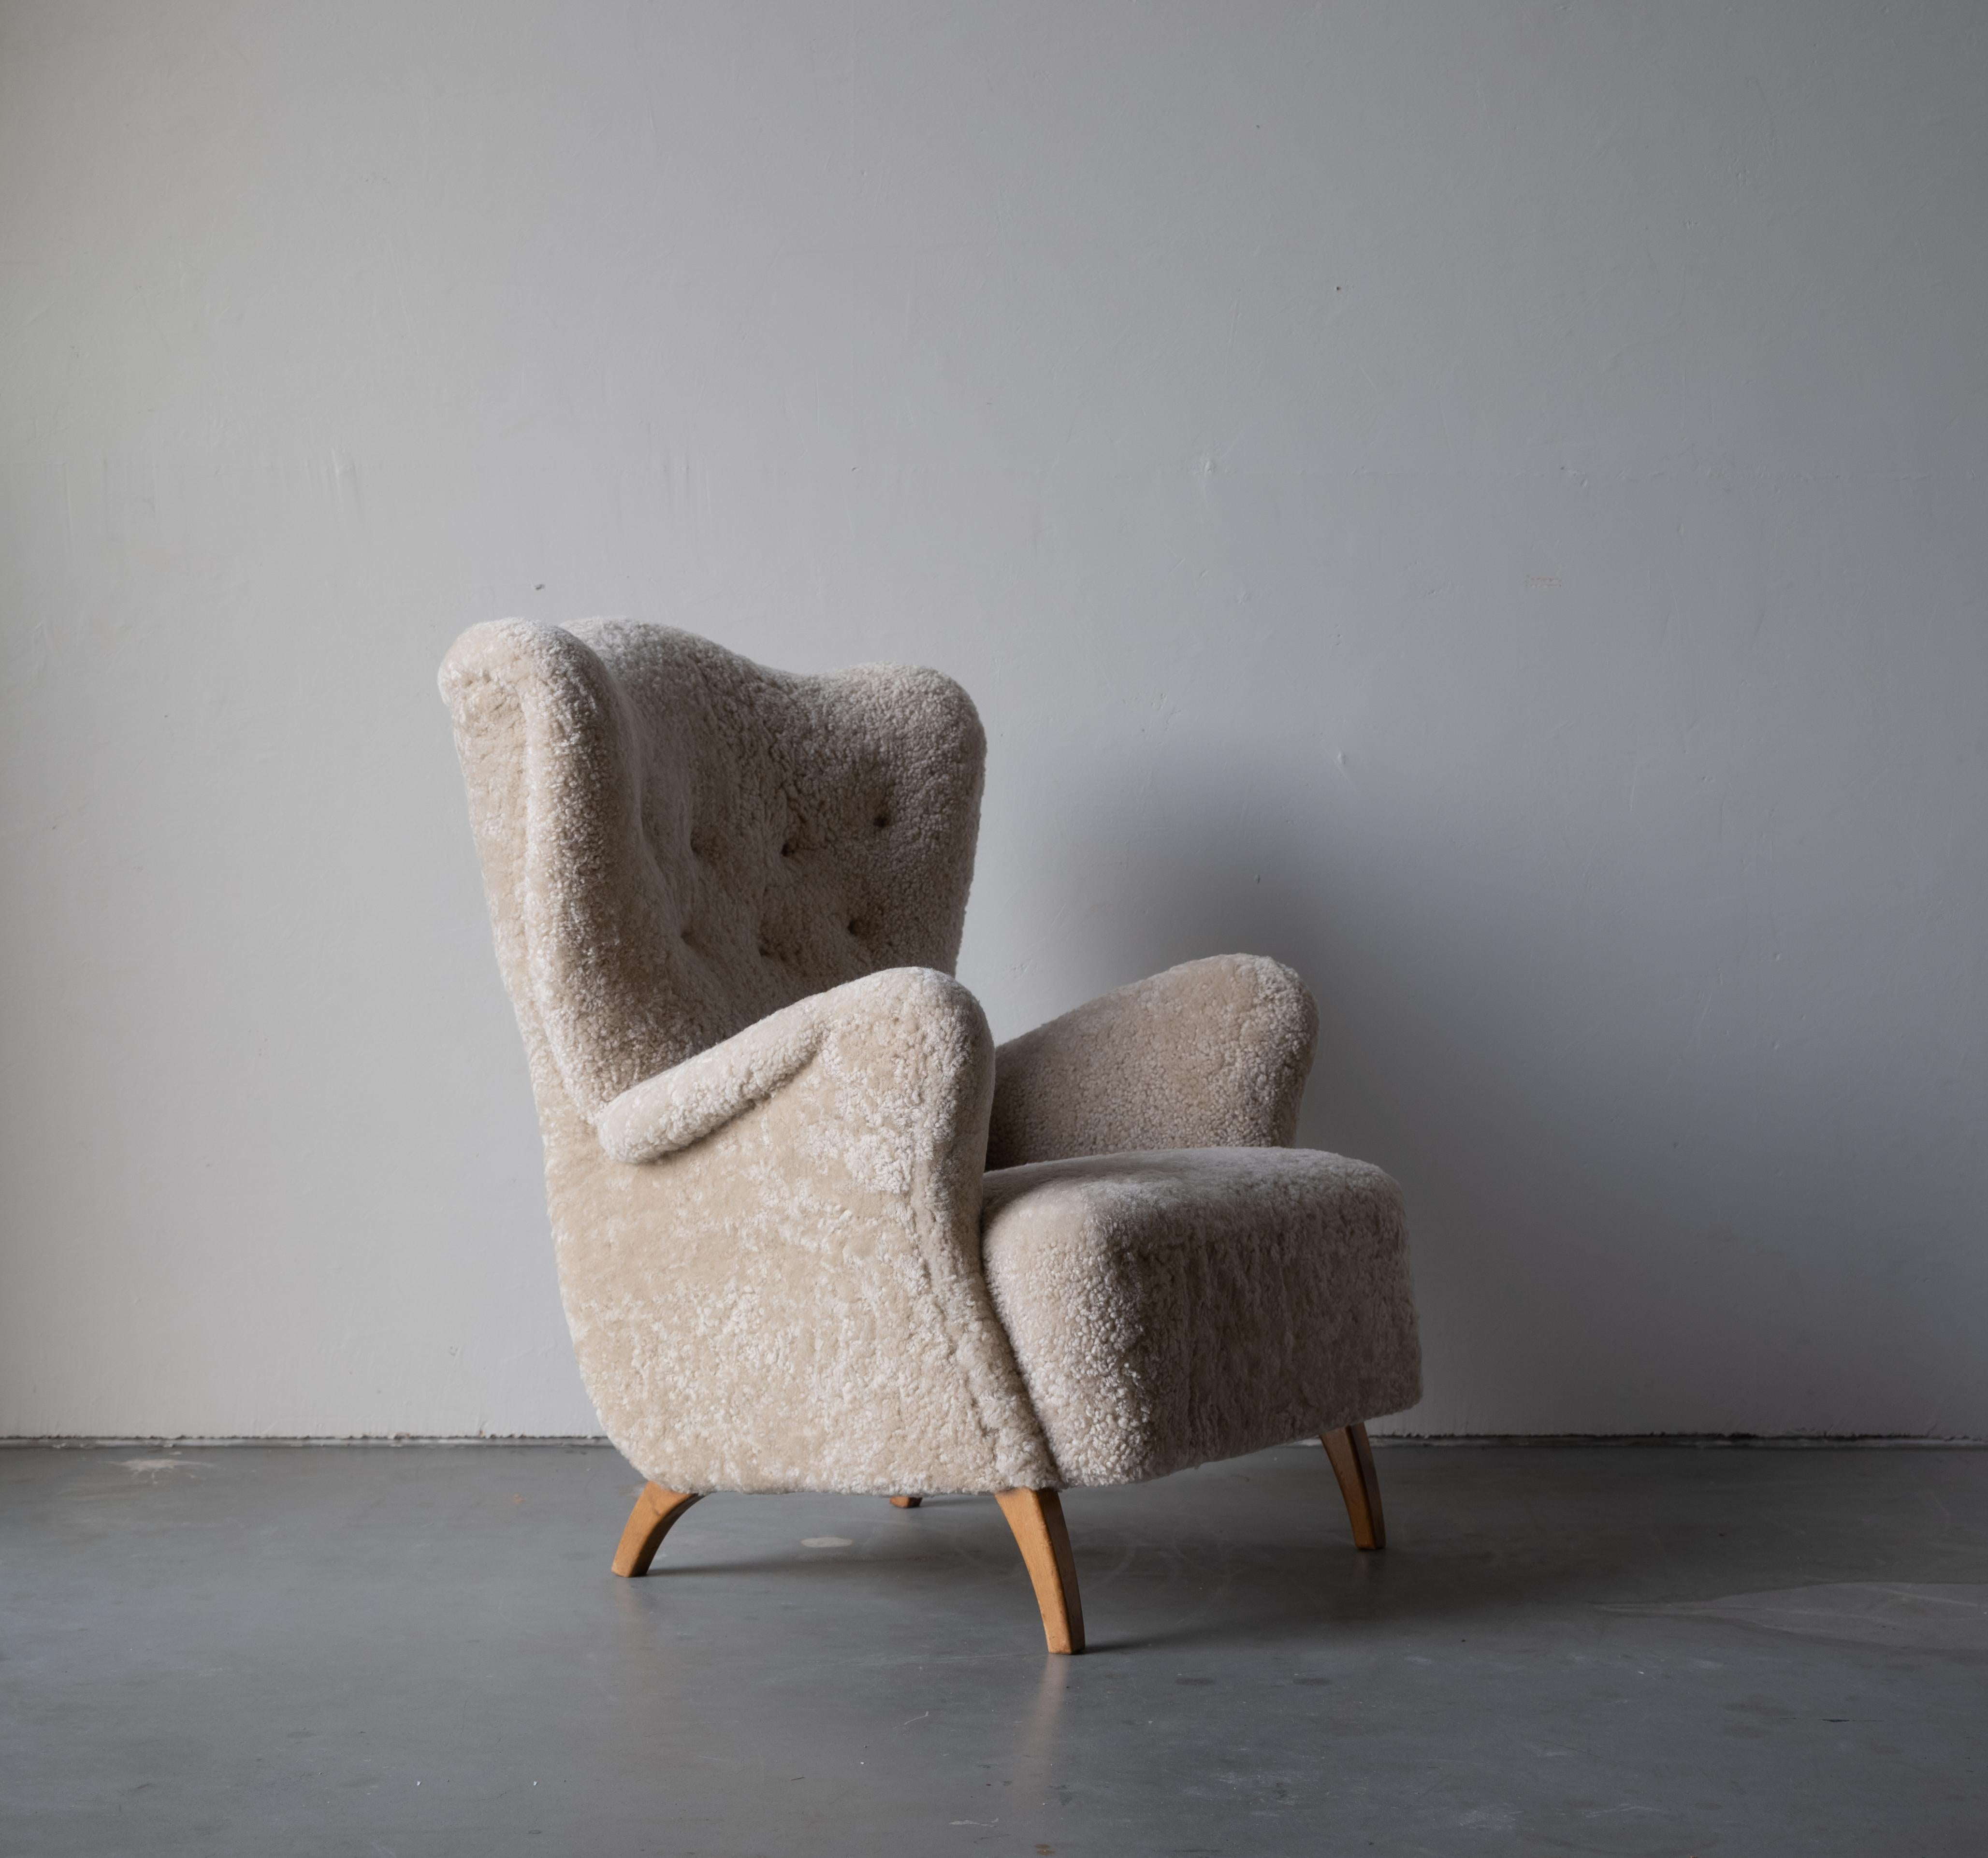 An early modernist lounge chair/armchair. Oak legs, reupholstered in beige lambskin / sheepskin. Produced in the 1940s in Scandinavia. 

Produced in the same era as works by Philip Arctander, Viggo Boesen, Flemming and Mogens Lassen, Kurt Ostervig